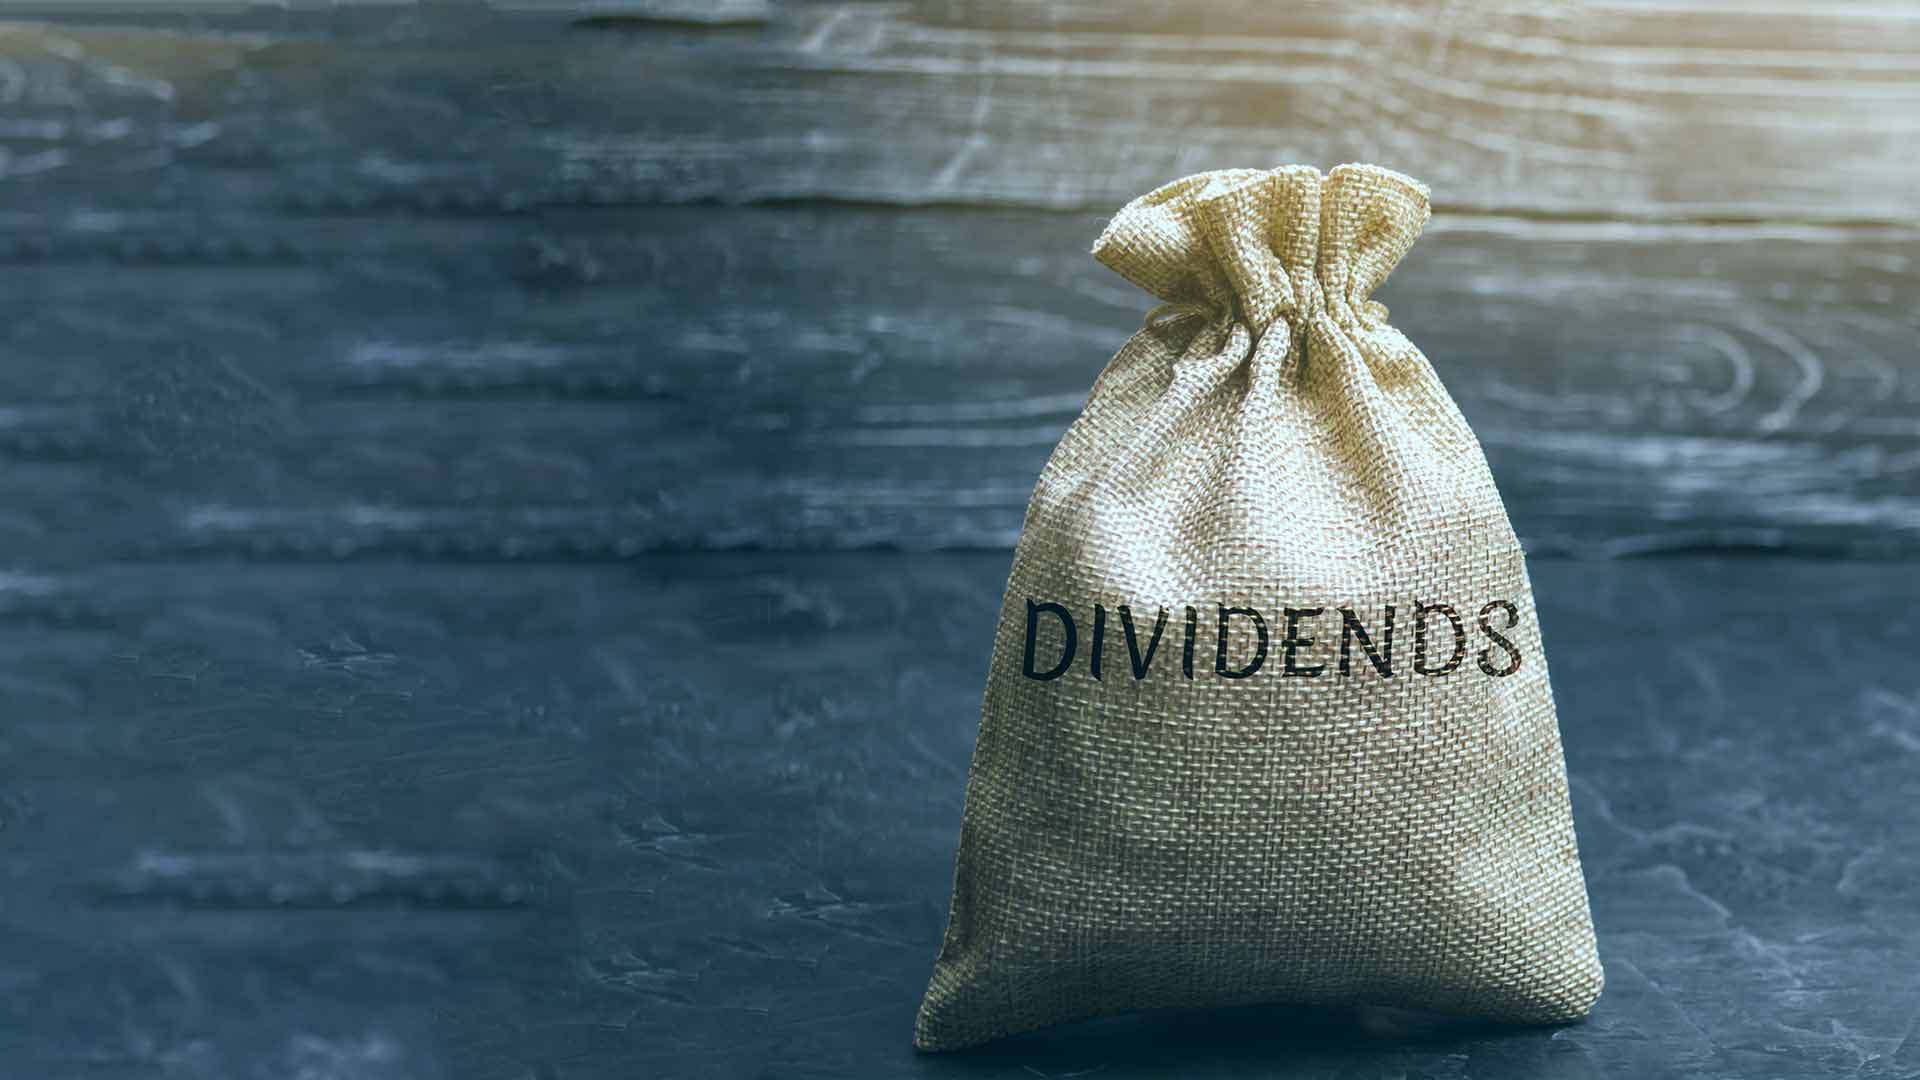 Capital Dividends